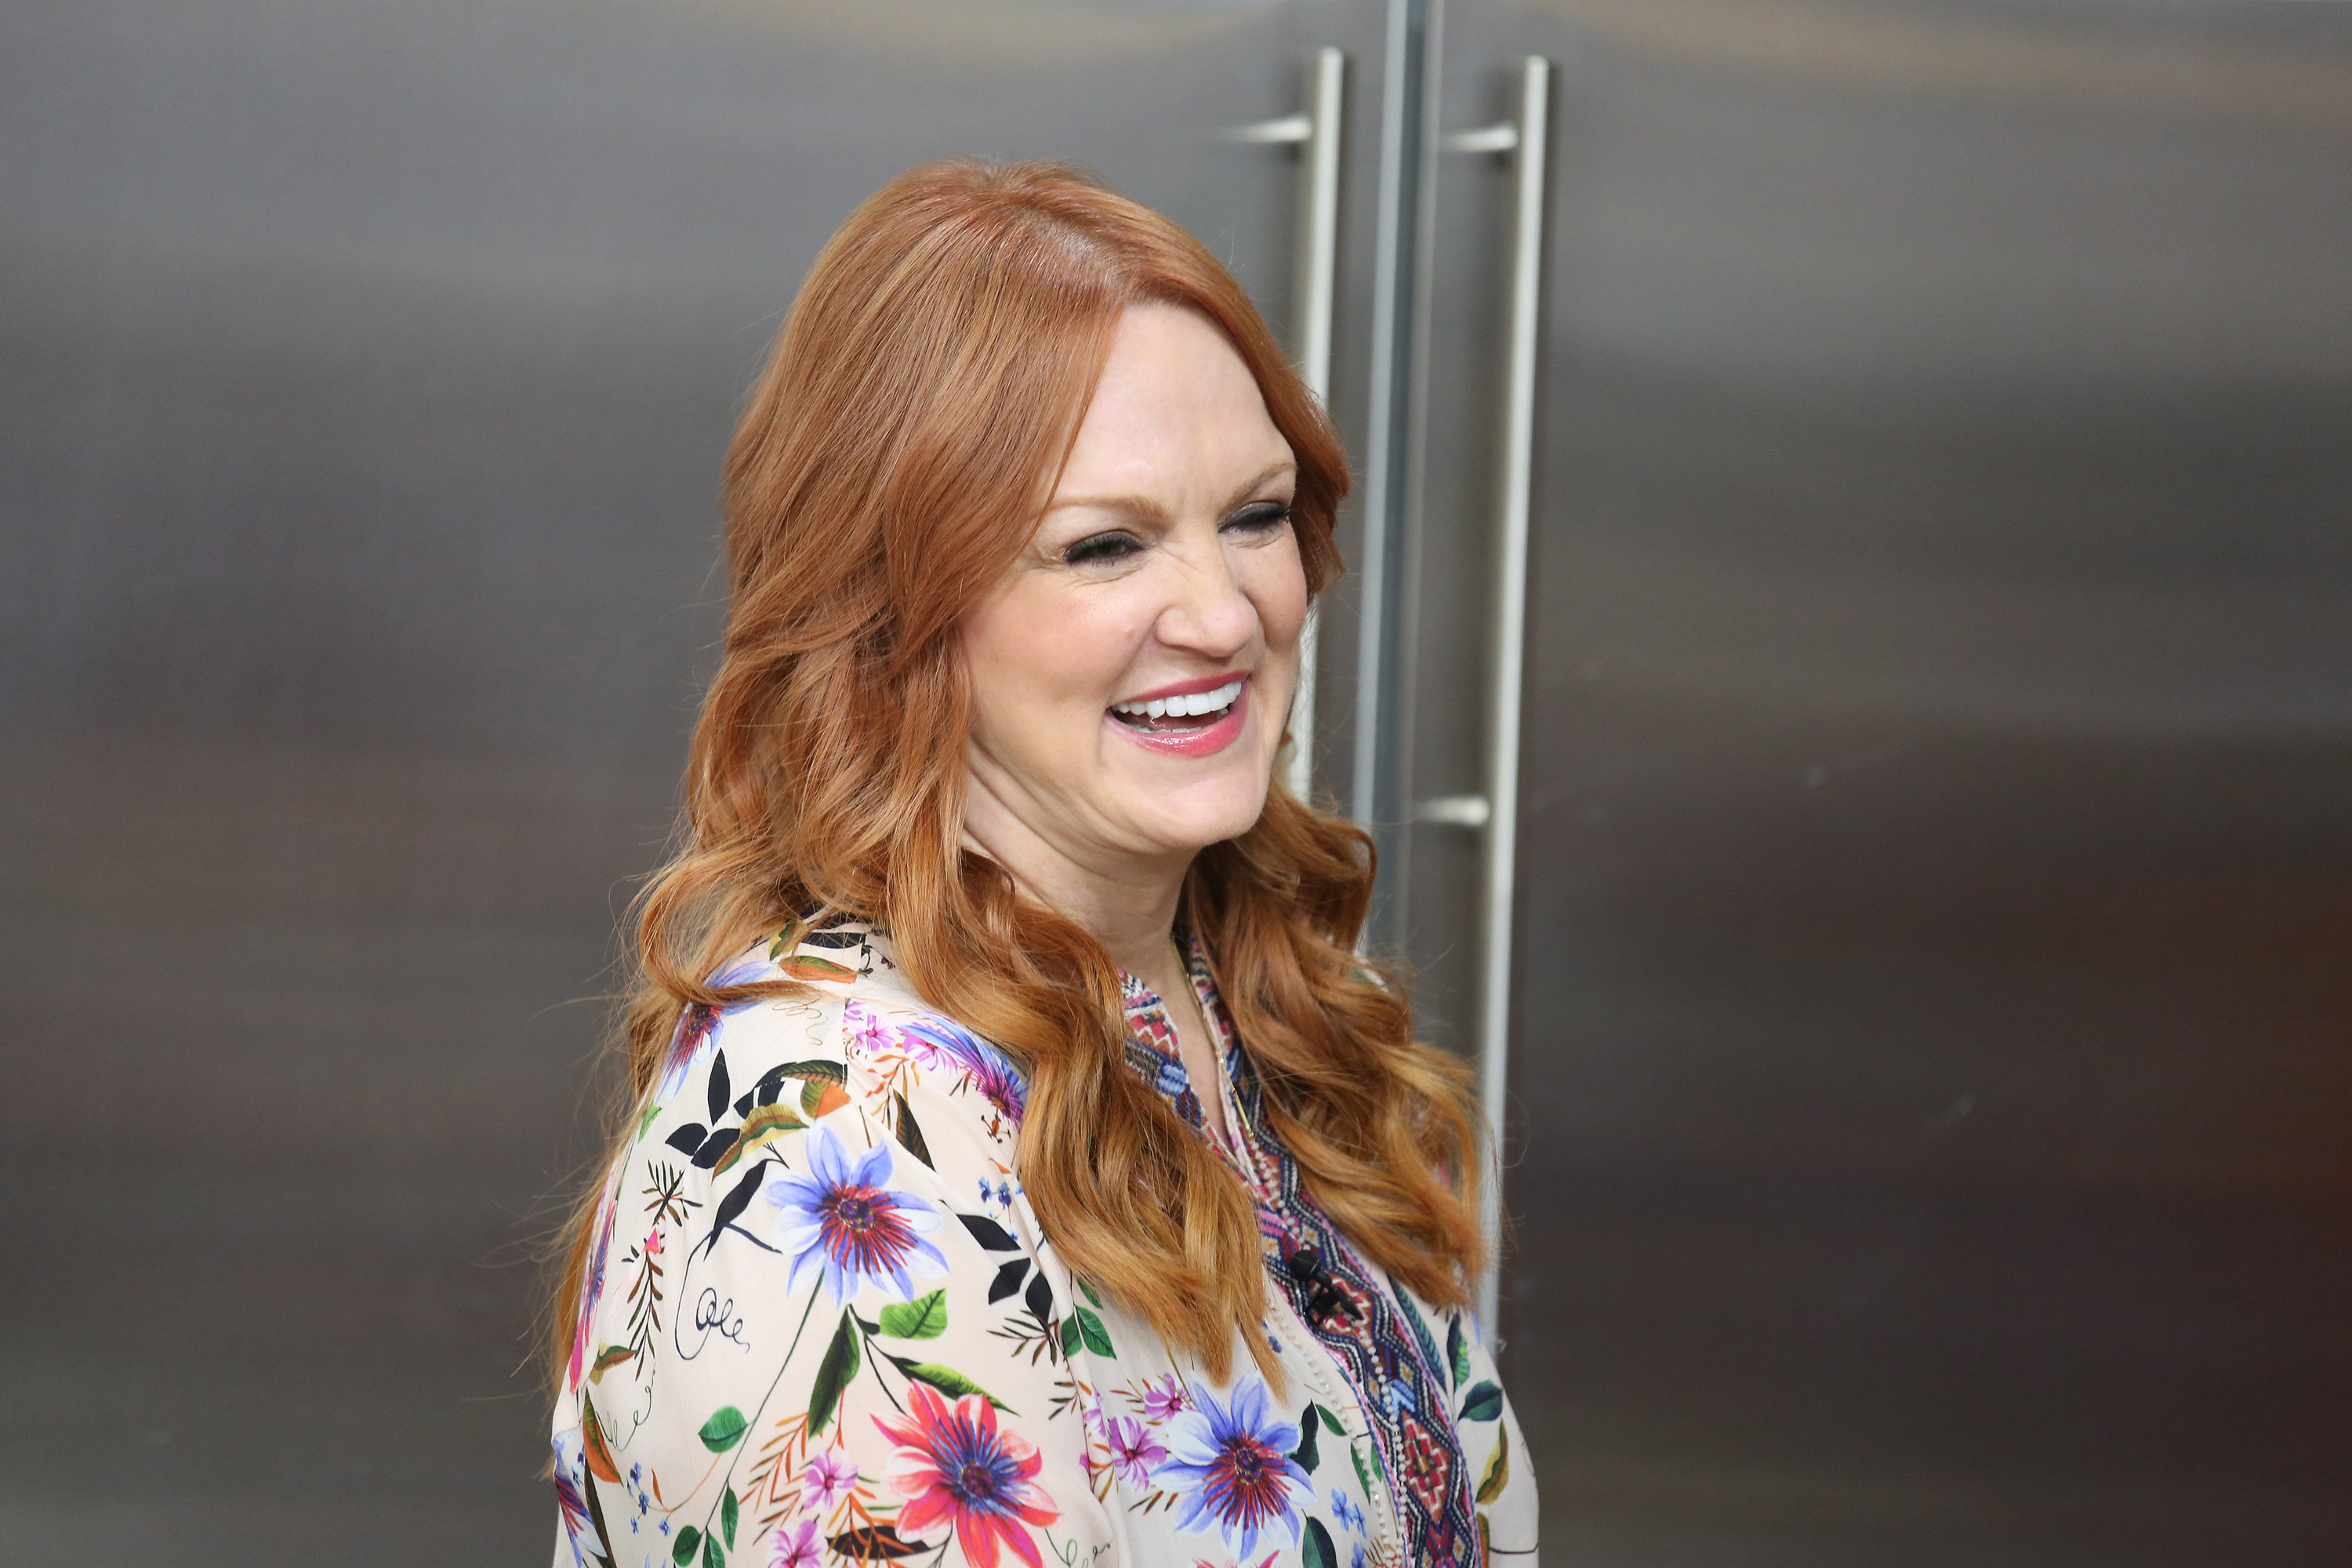 The Pioneer Woman, Ree Drummond, smiles wearing a bright floral top